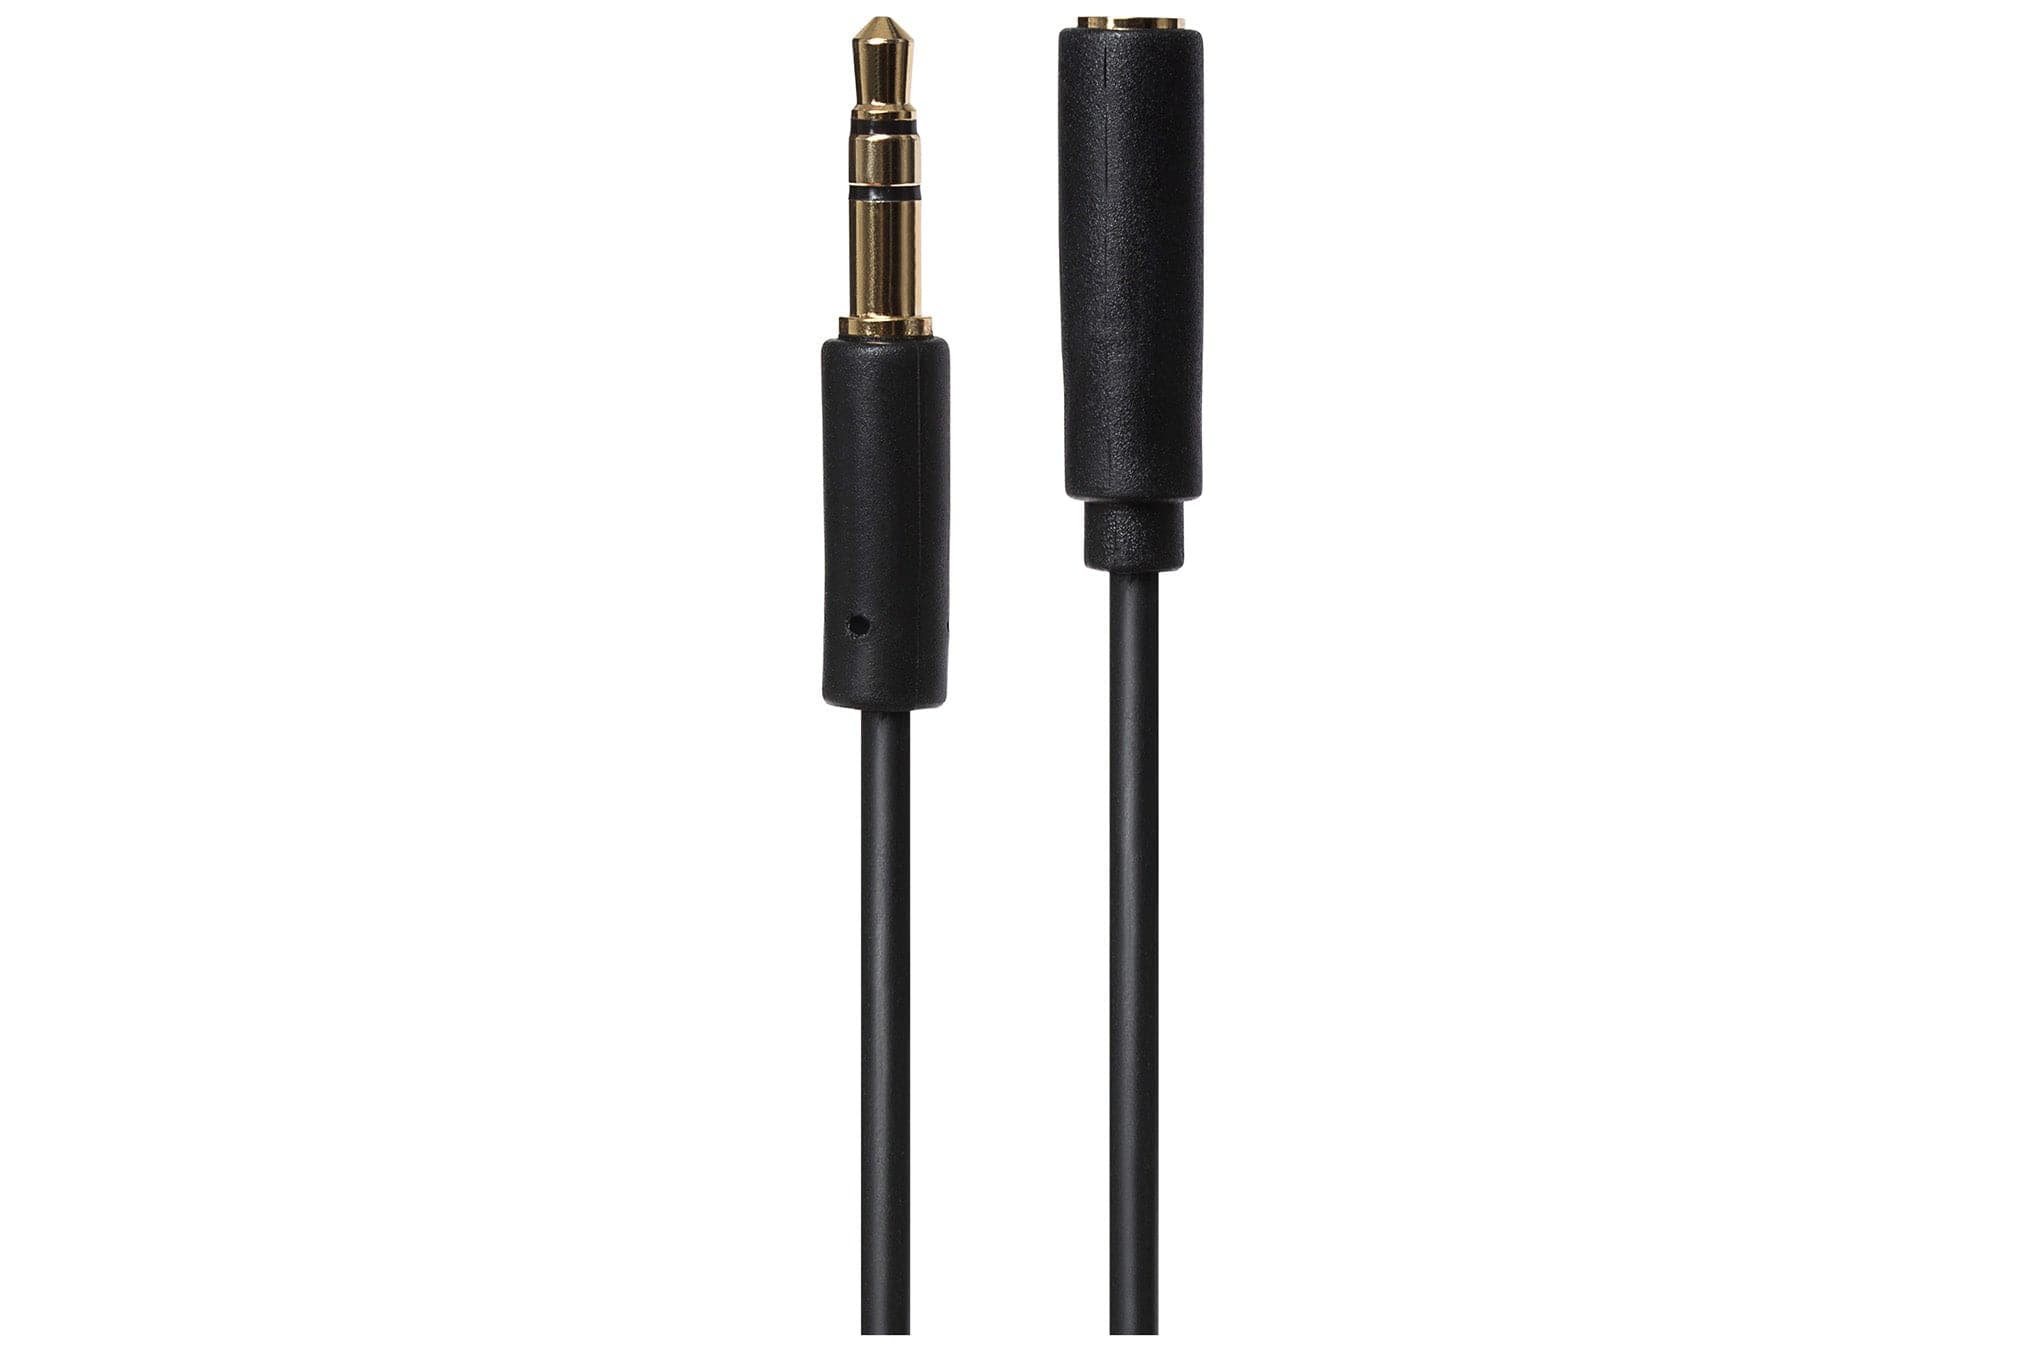 Maplin 3.5mm Aux Stereo 3 Pole TRS Jack Plug to 3.5mm Female Jack Plug Extension Cable - Black